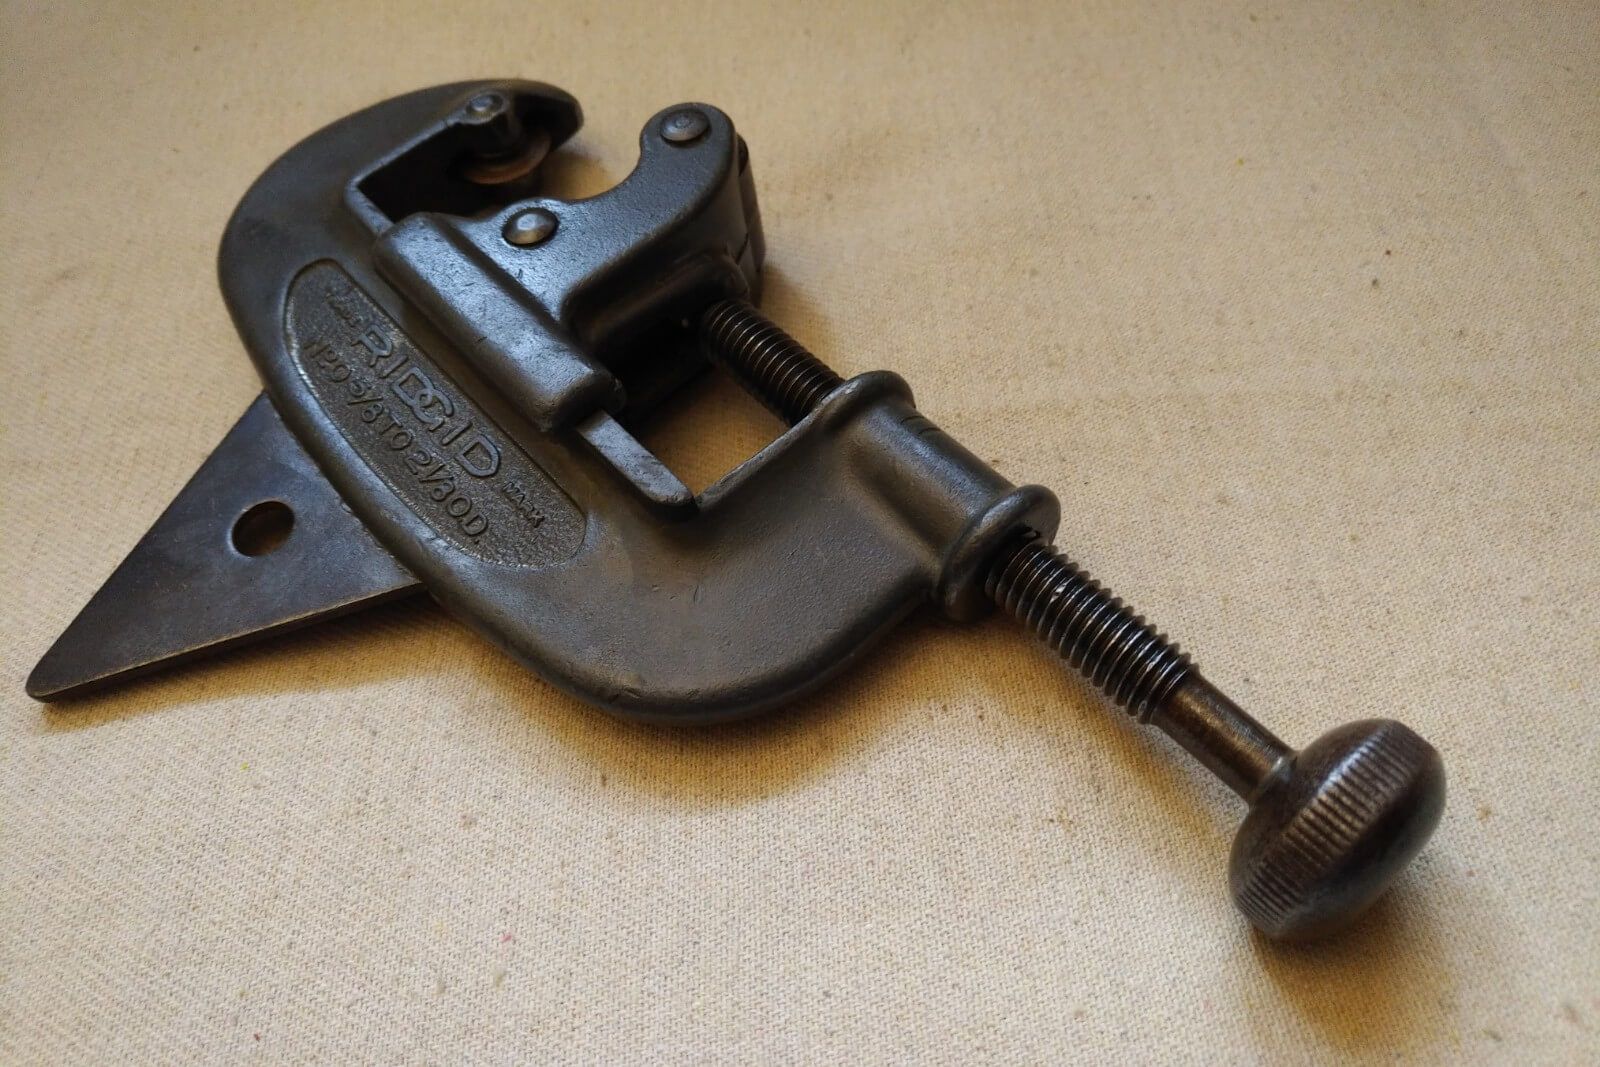 Ridgid No 105 Vintage Pipe cutter 1/8 to 1 1/8 inch USA made 